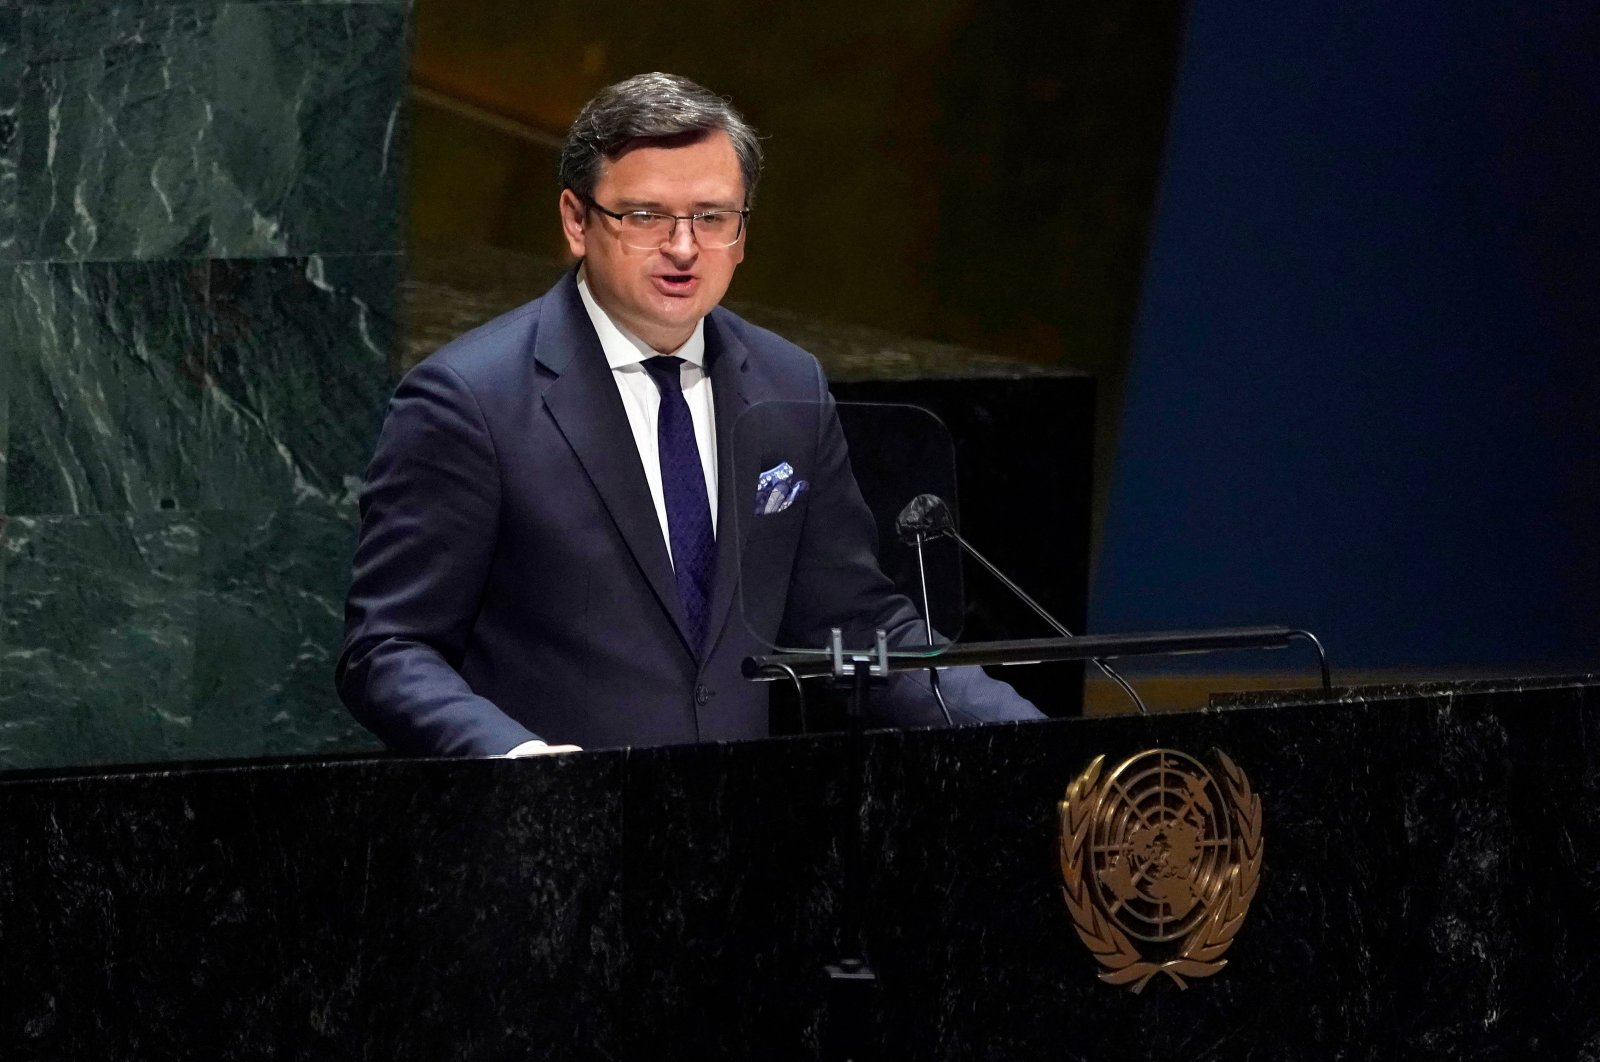 Ukrainian Foreign Minister Dmytro Kuleba speaks at the General Assembly 58th plenary meeting in New York on Feb. 23, 2022, on the Russia-Ukraine conflict. (AFP Photo)